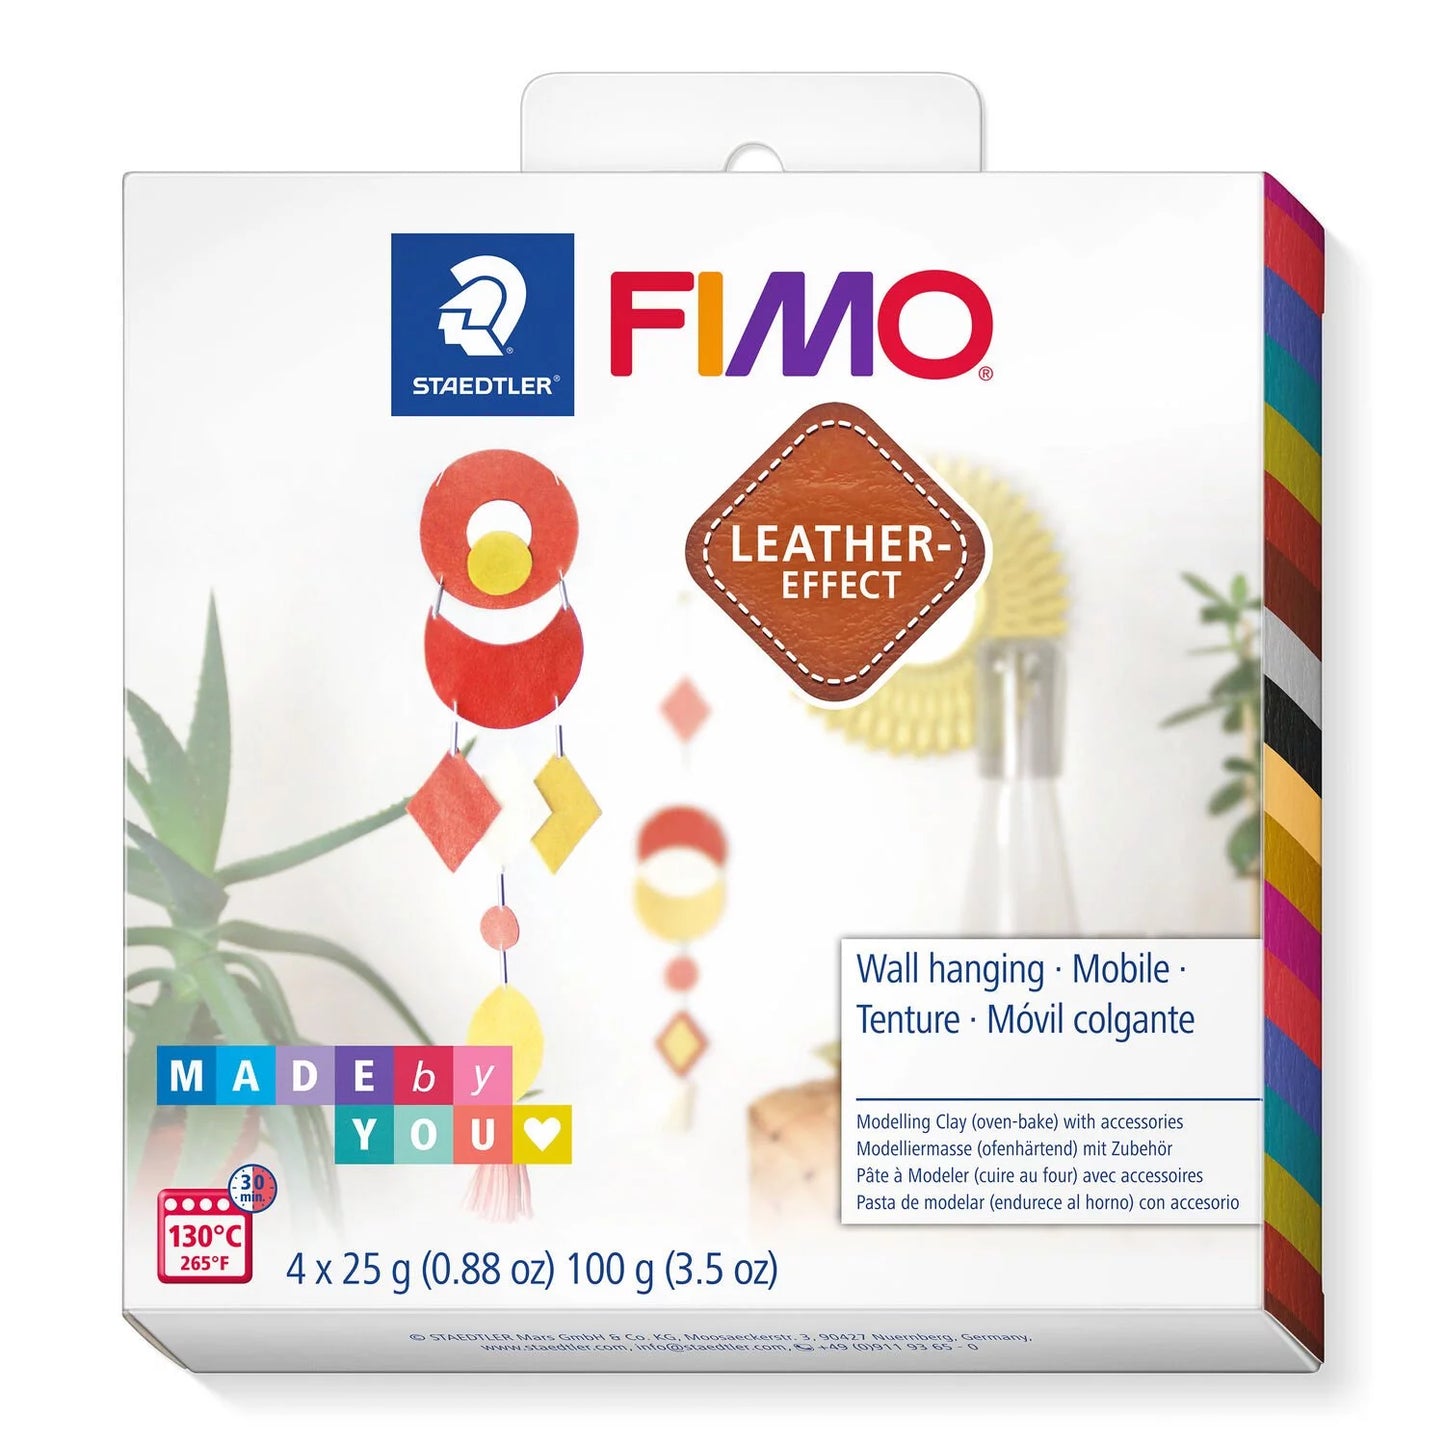 WALL HANING ART LEATHER EFFECT DIY CLAY KIT - FIMO